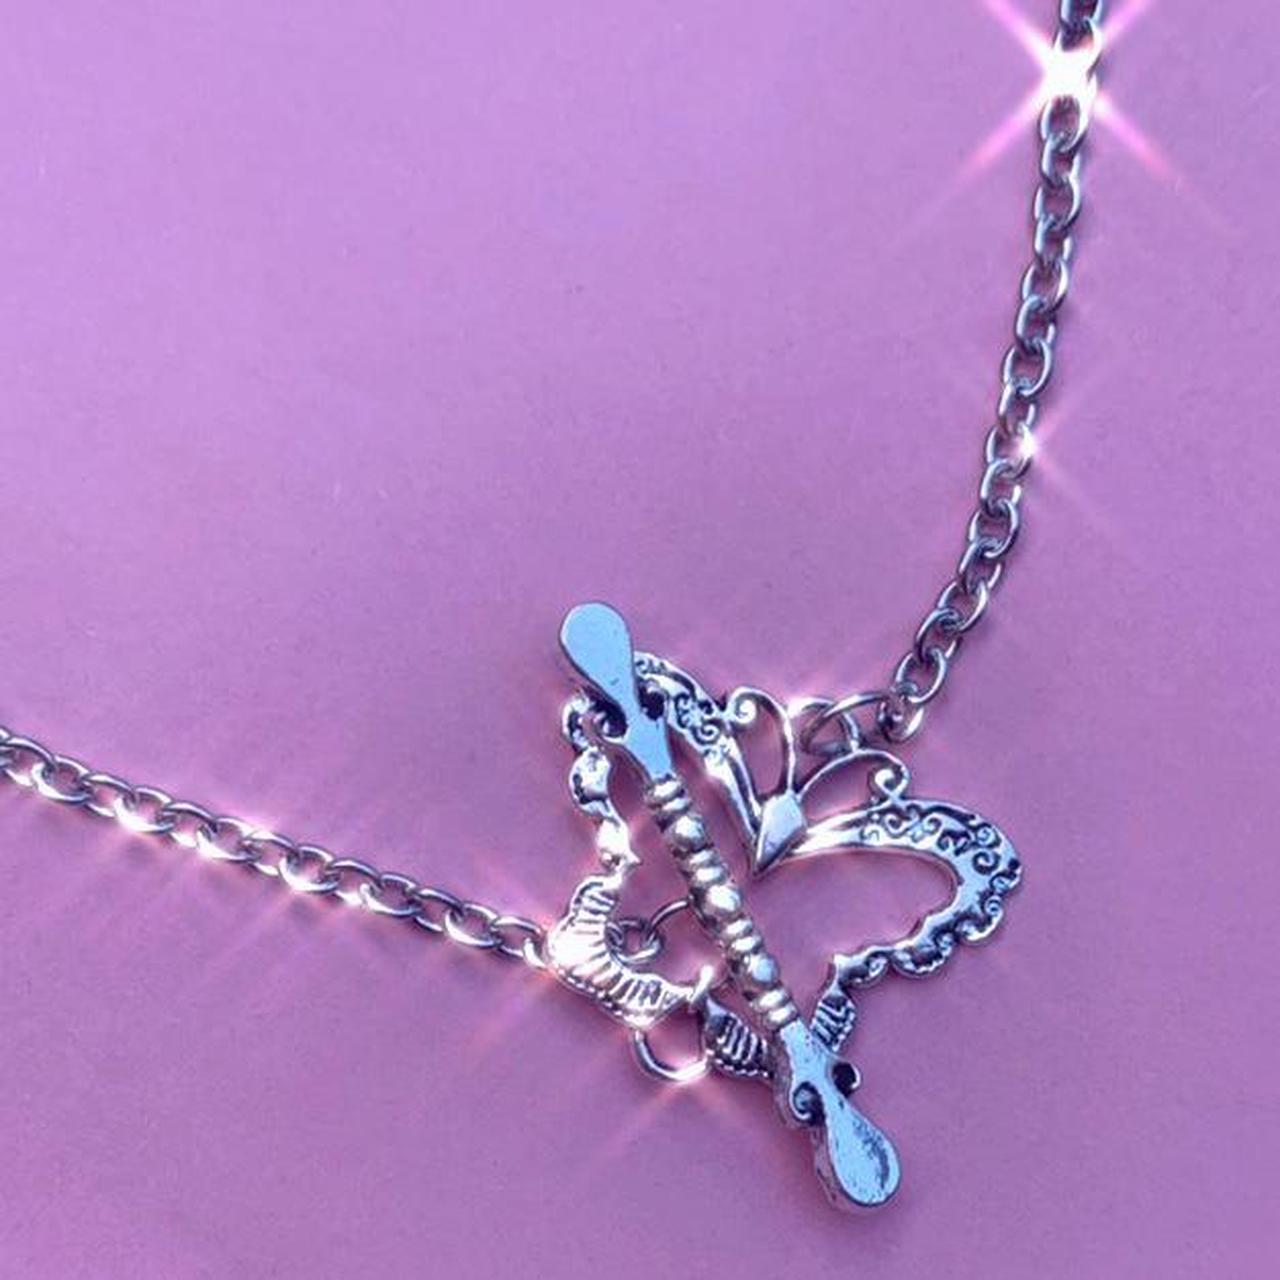 The butterfly clasp Chain necklace